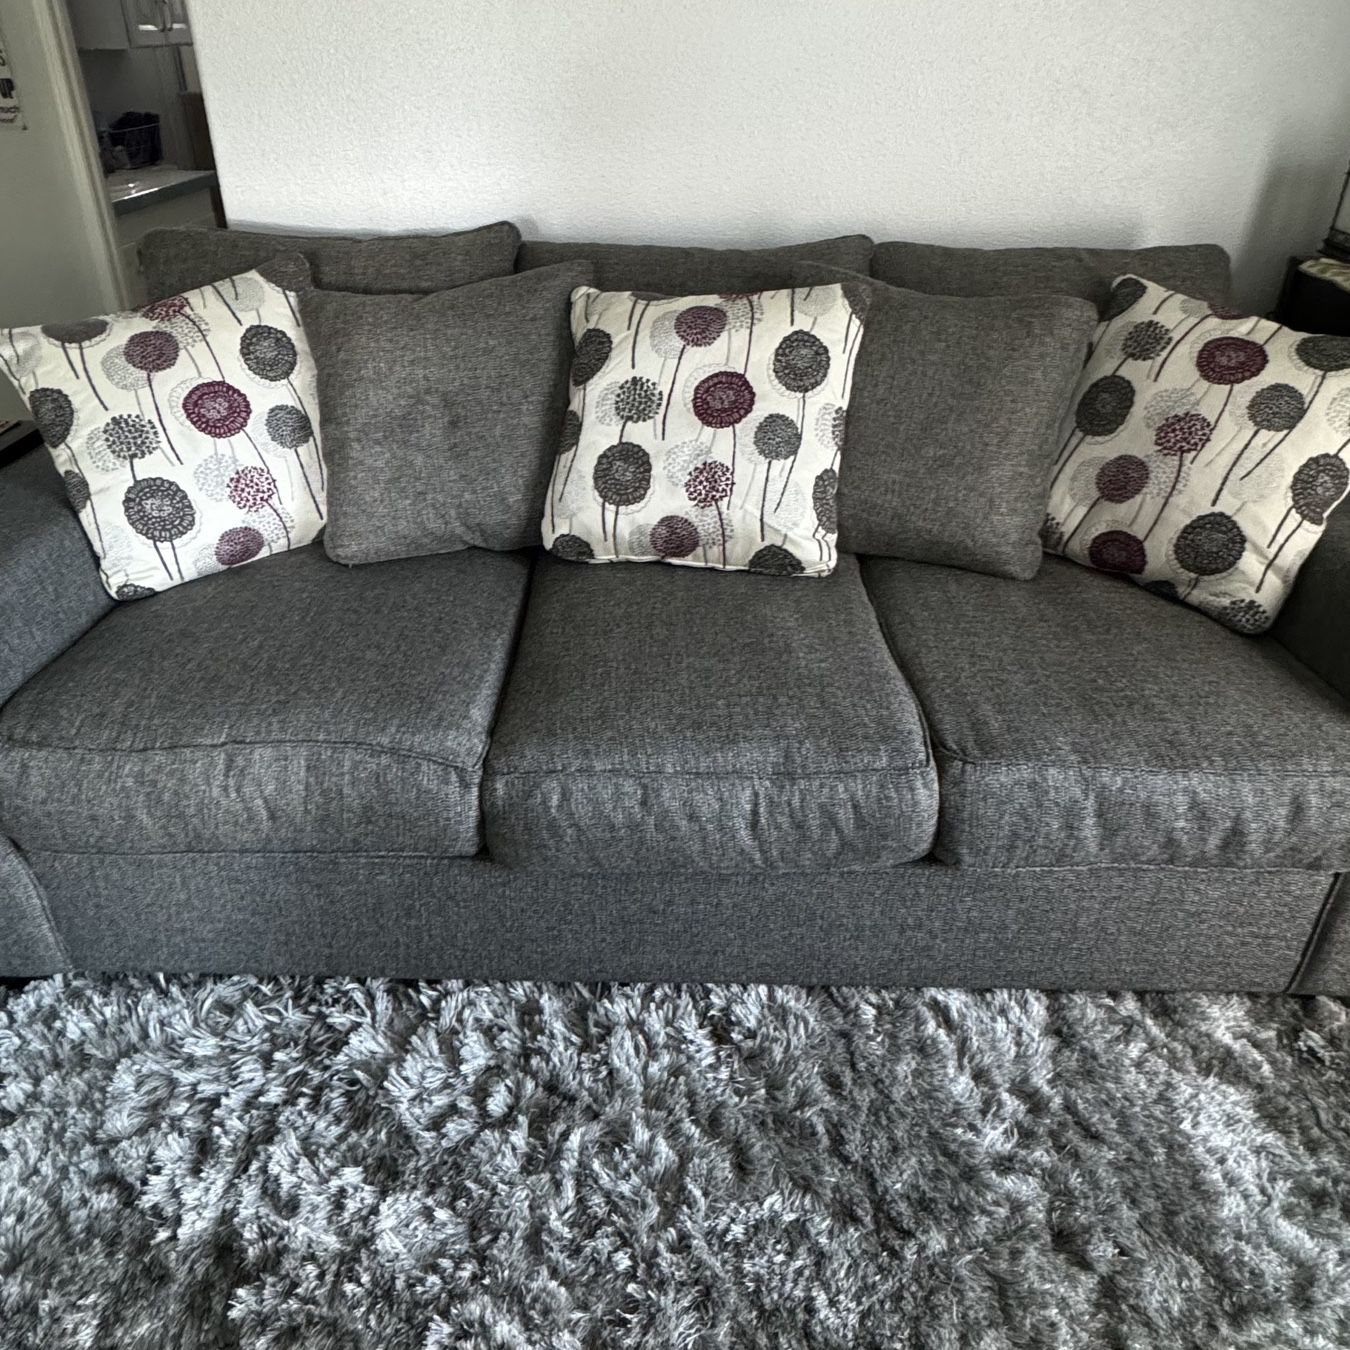 Down Couch - Excellent Condition     $500.